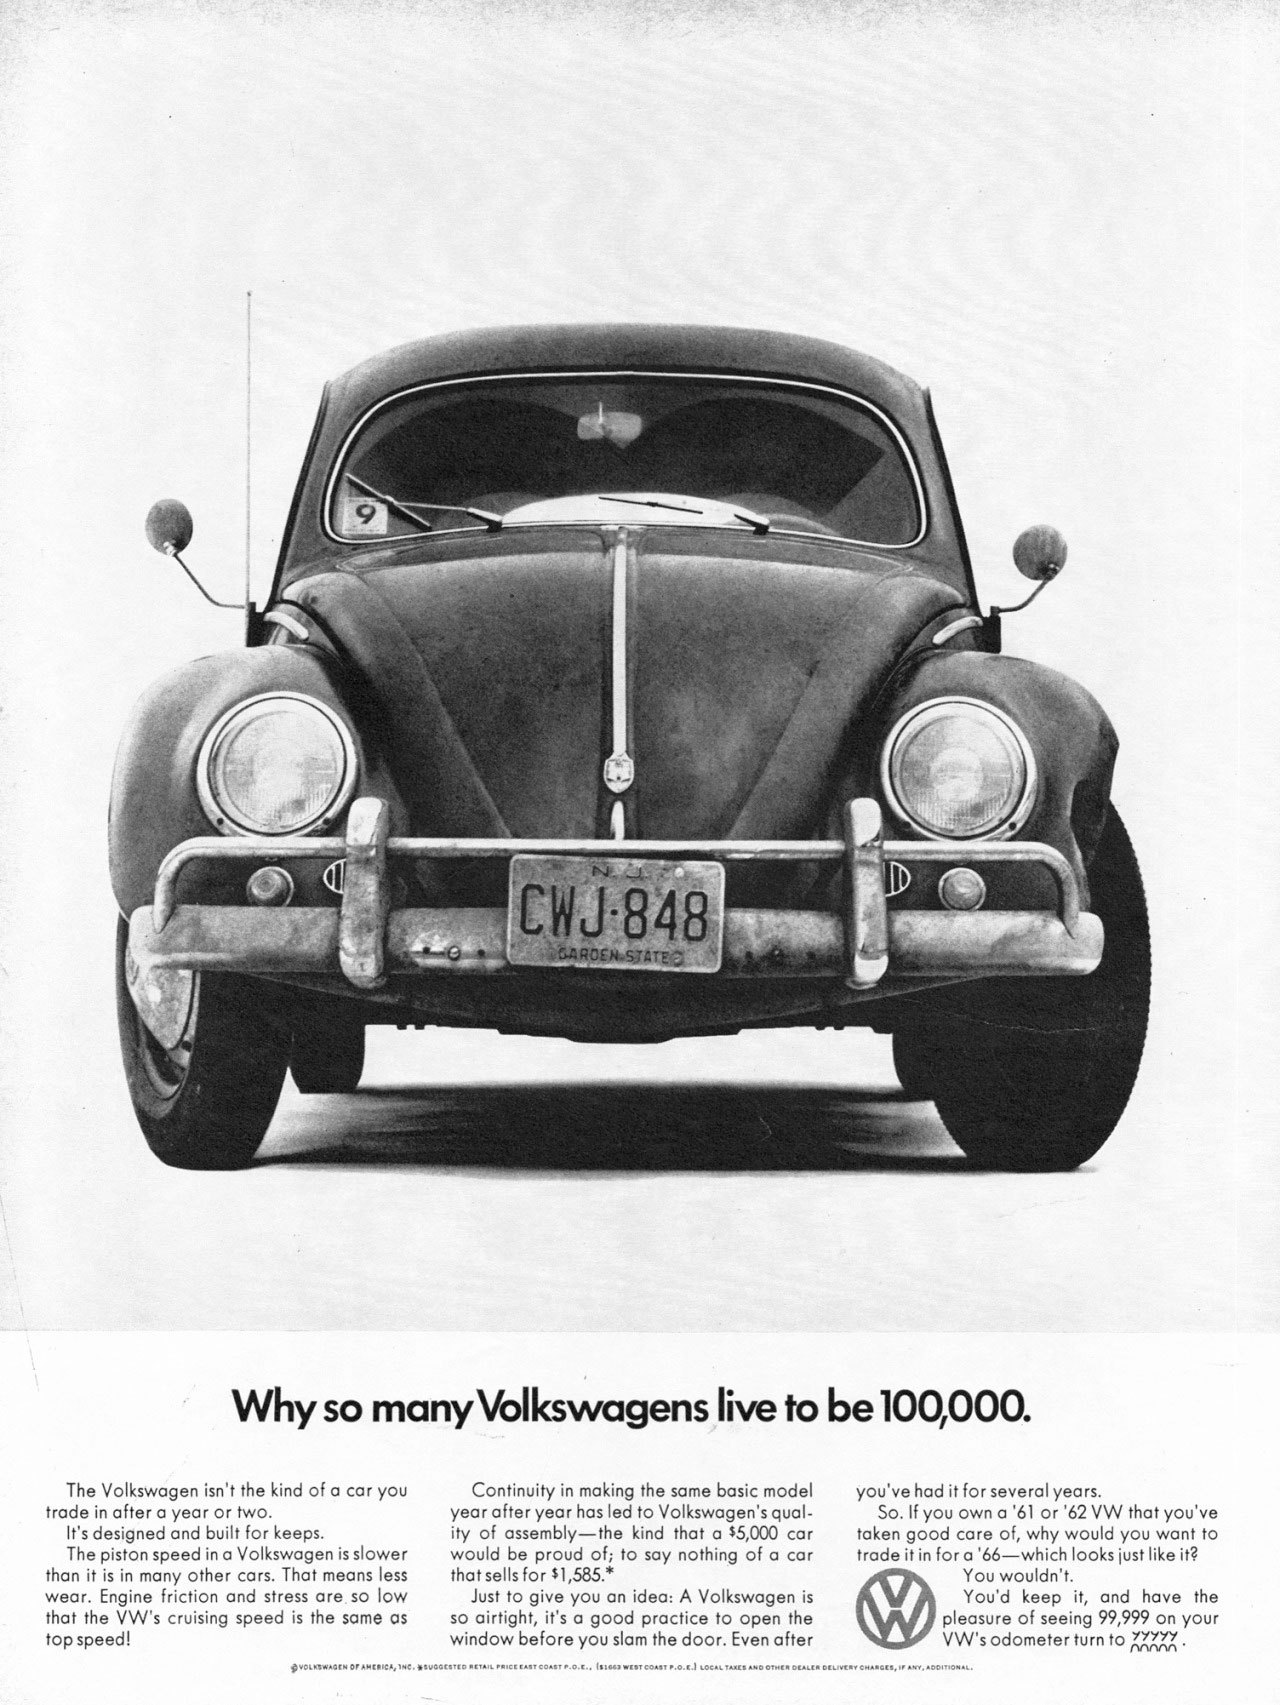 Why so many Volkswagens live to be 100,000. 
The Volkswagen isn't the kind of a car you trade in after a year or two. It's designed and built for keeps. The piston speed in a Volkswagen is slower than it is in many other cars. That means less wear. Engine friction and stress are so low that the VW's cruising speed is the same as top speed! 
Continuity in making the same basic model year after year has led to Volkswagen's qual-ity of assembly—the kind that a $5,000 car would be proud of; to say nothing of a can that sells for $1,585.* Just to give you an idea: A Volkswagen is so airtight, it's a good practice to open the window before you slam the door. Even after 
you've had it for several years. So. If you own a '61 or '62 VW that you've taken good care of, why would you want to trade it in for a '66—which looks just like it? You wouldn't. You'd keep it, and have the pleasure of seeing 99,999 on your VW's odometer turn to 00000.